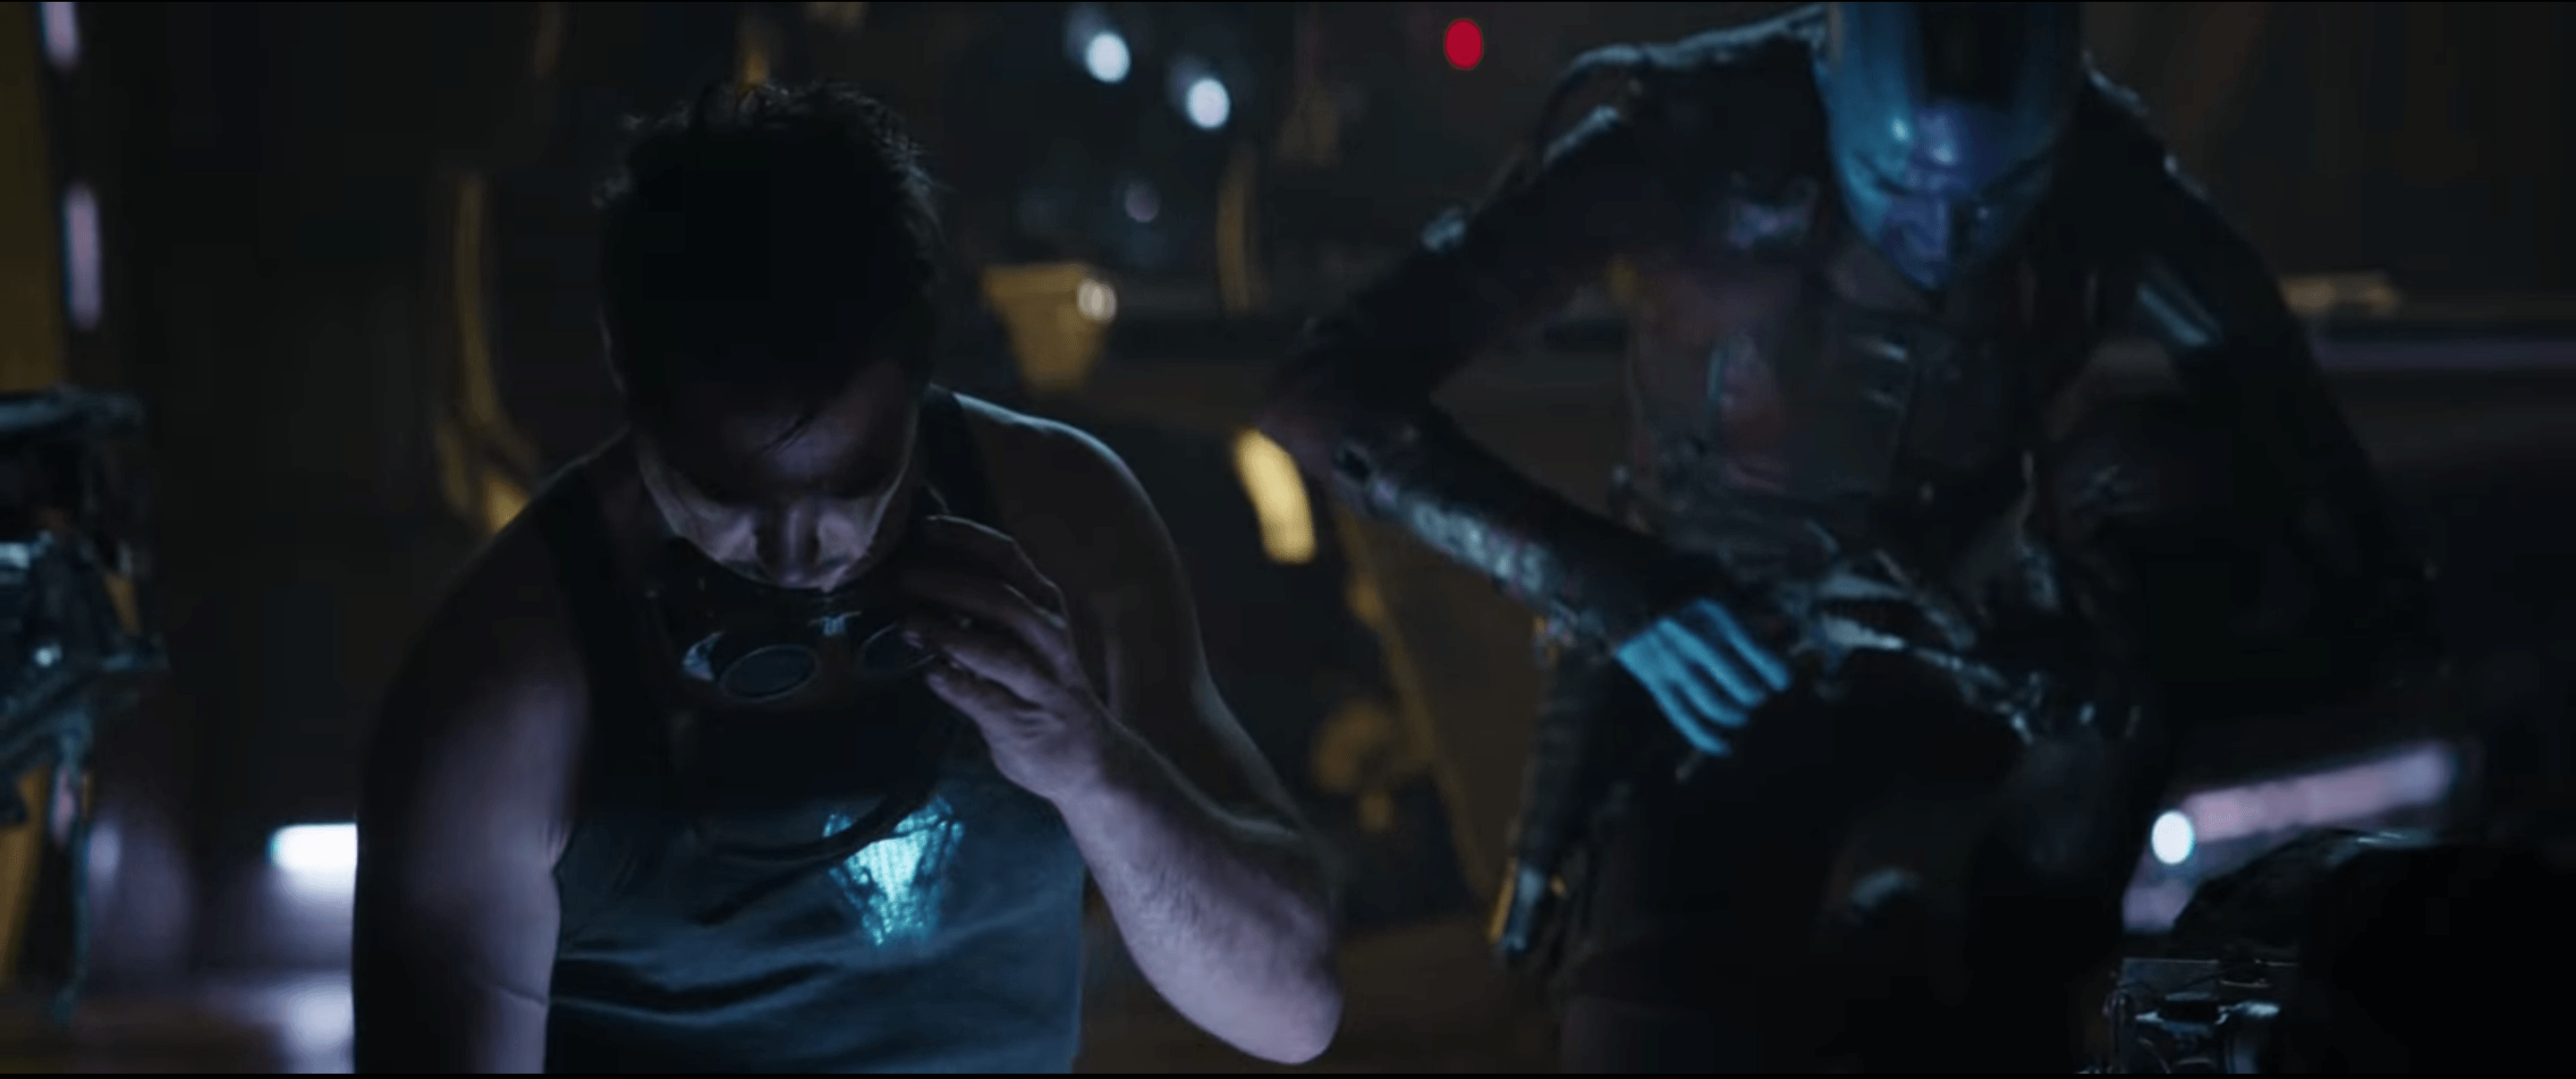 Avengers Endgame Trailers: We Broke Down Every Second